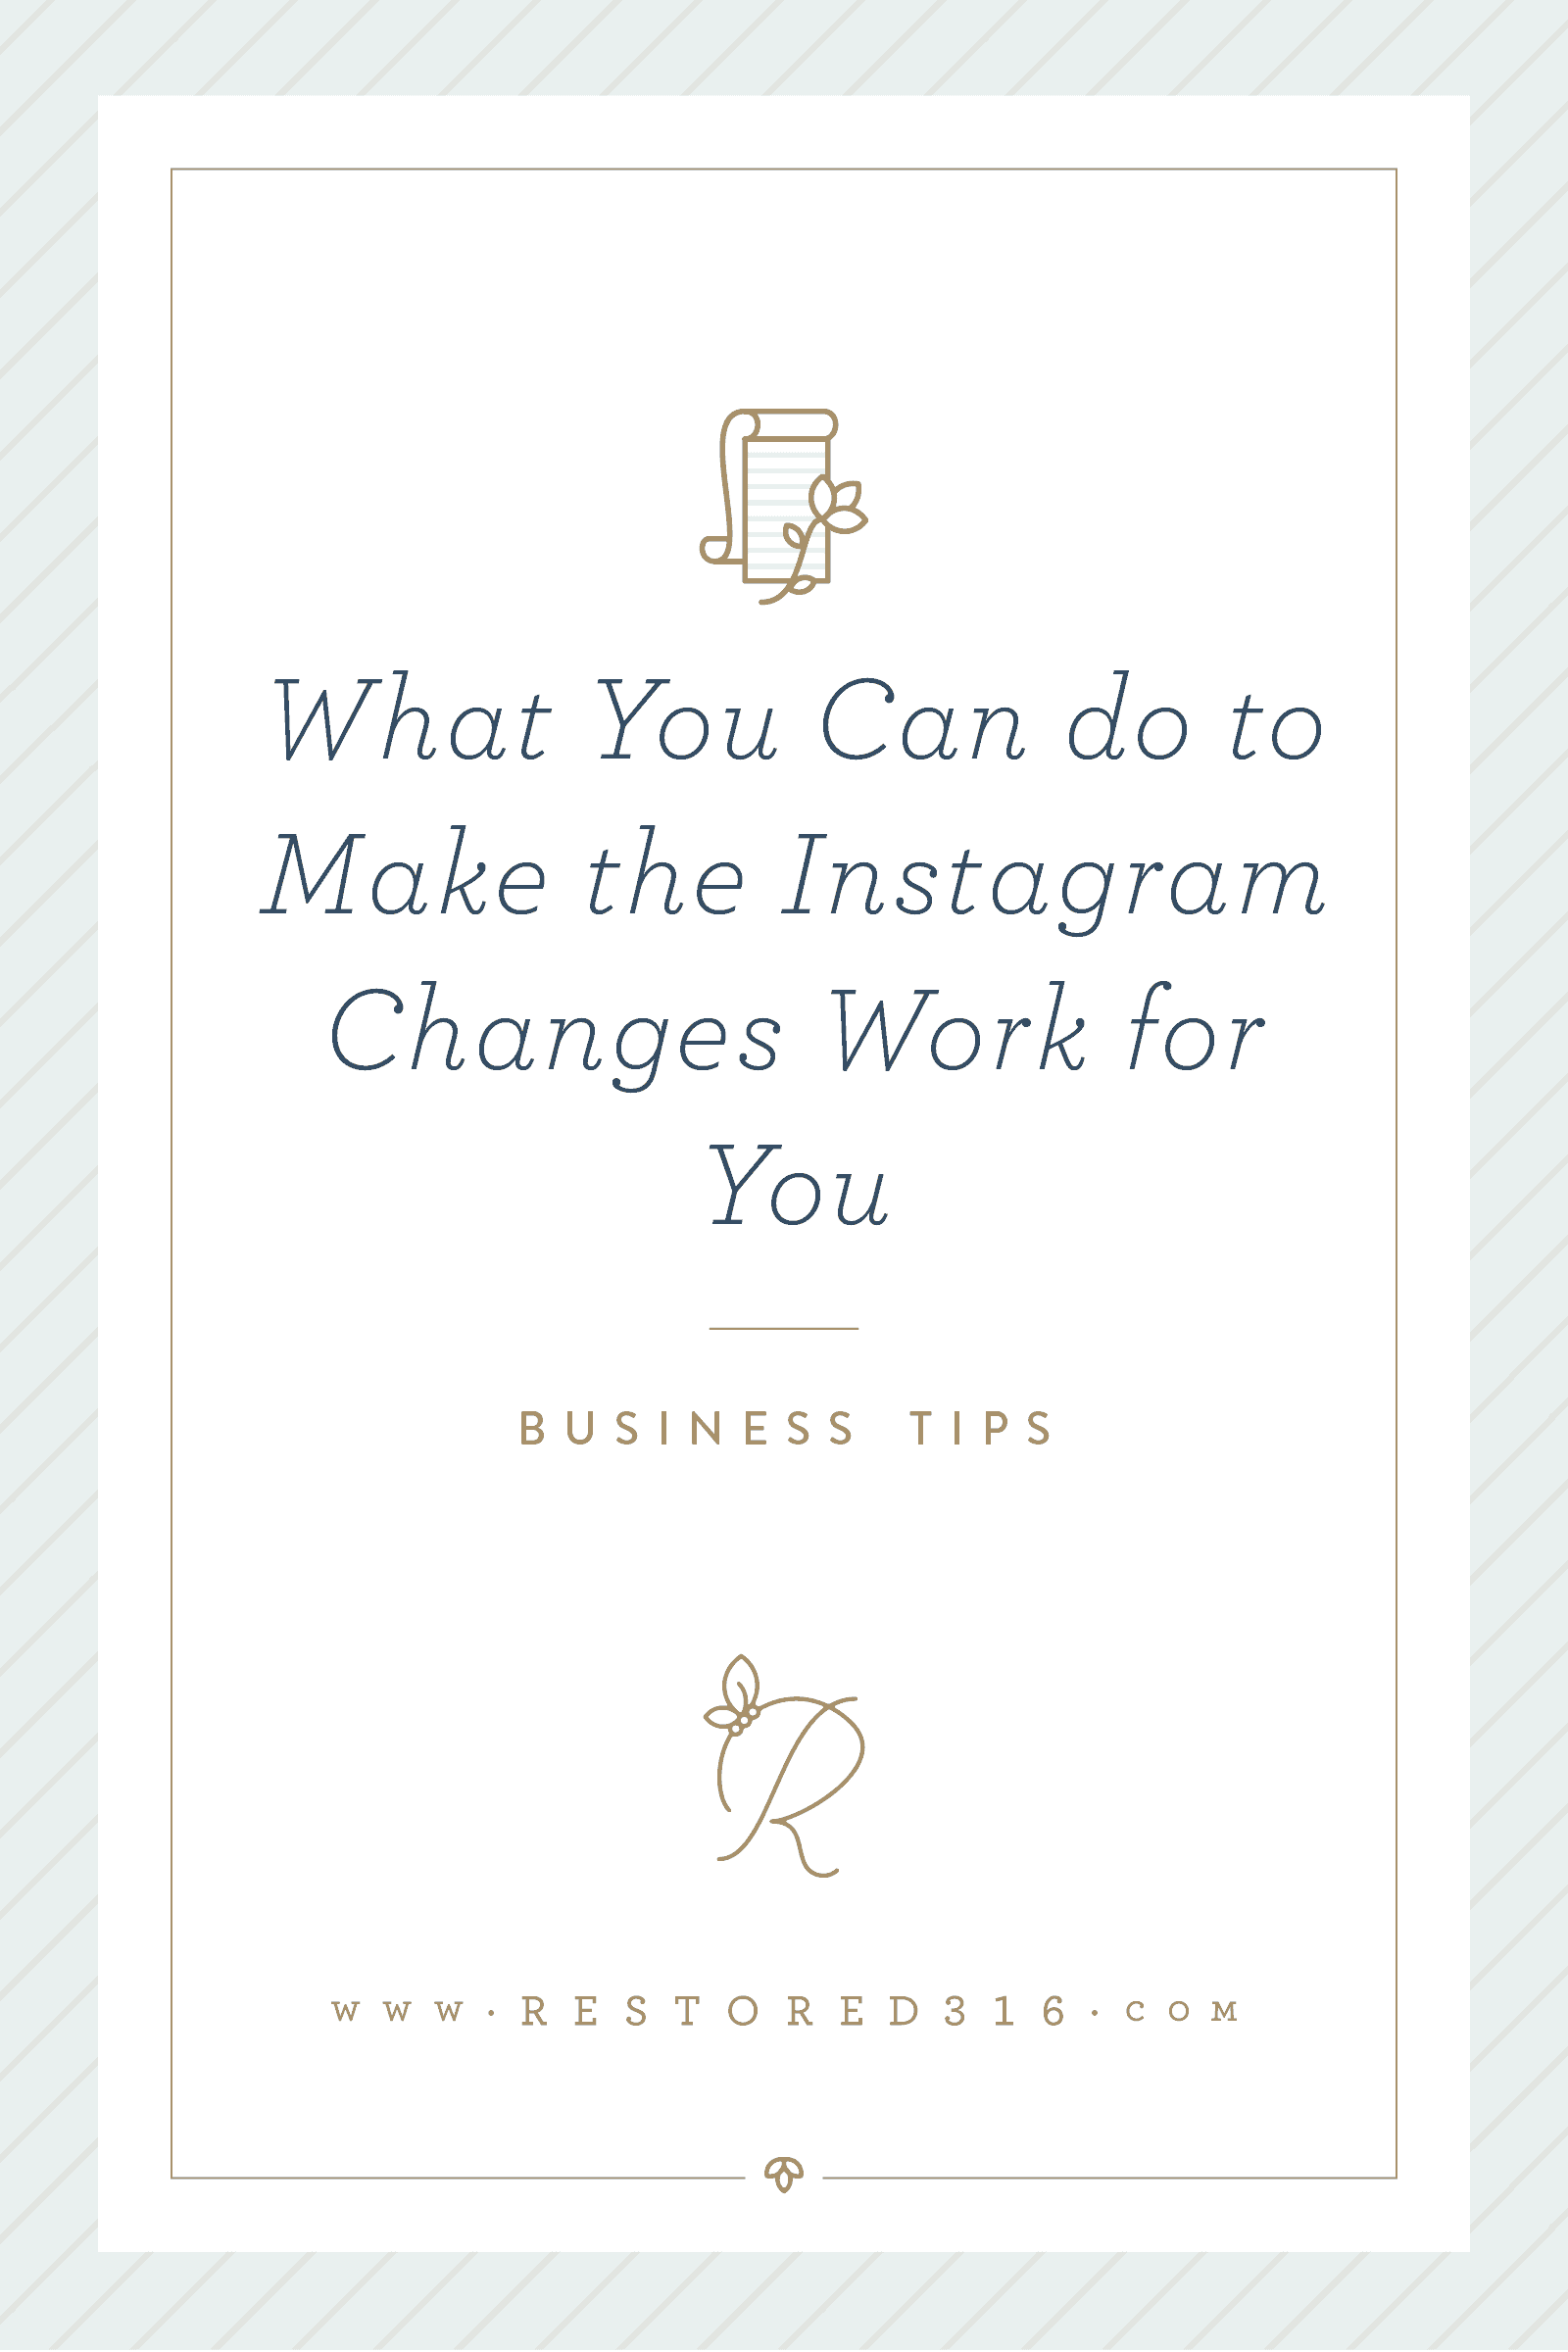 What you can do to make the Instagram changes work for you